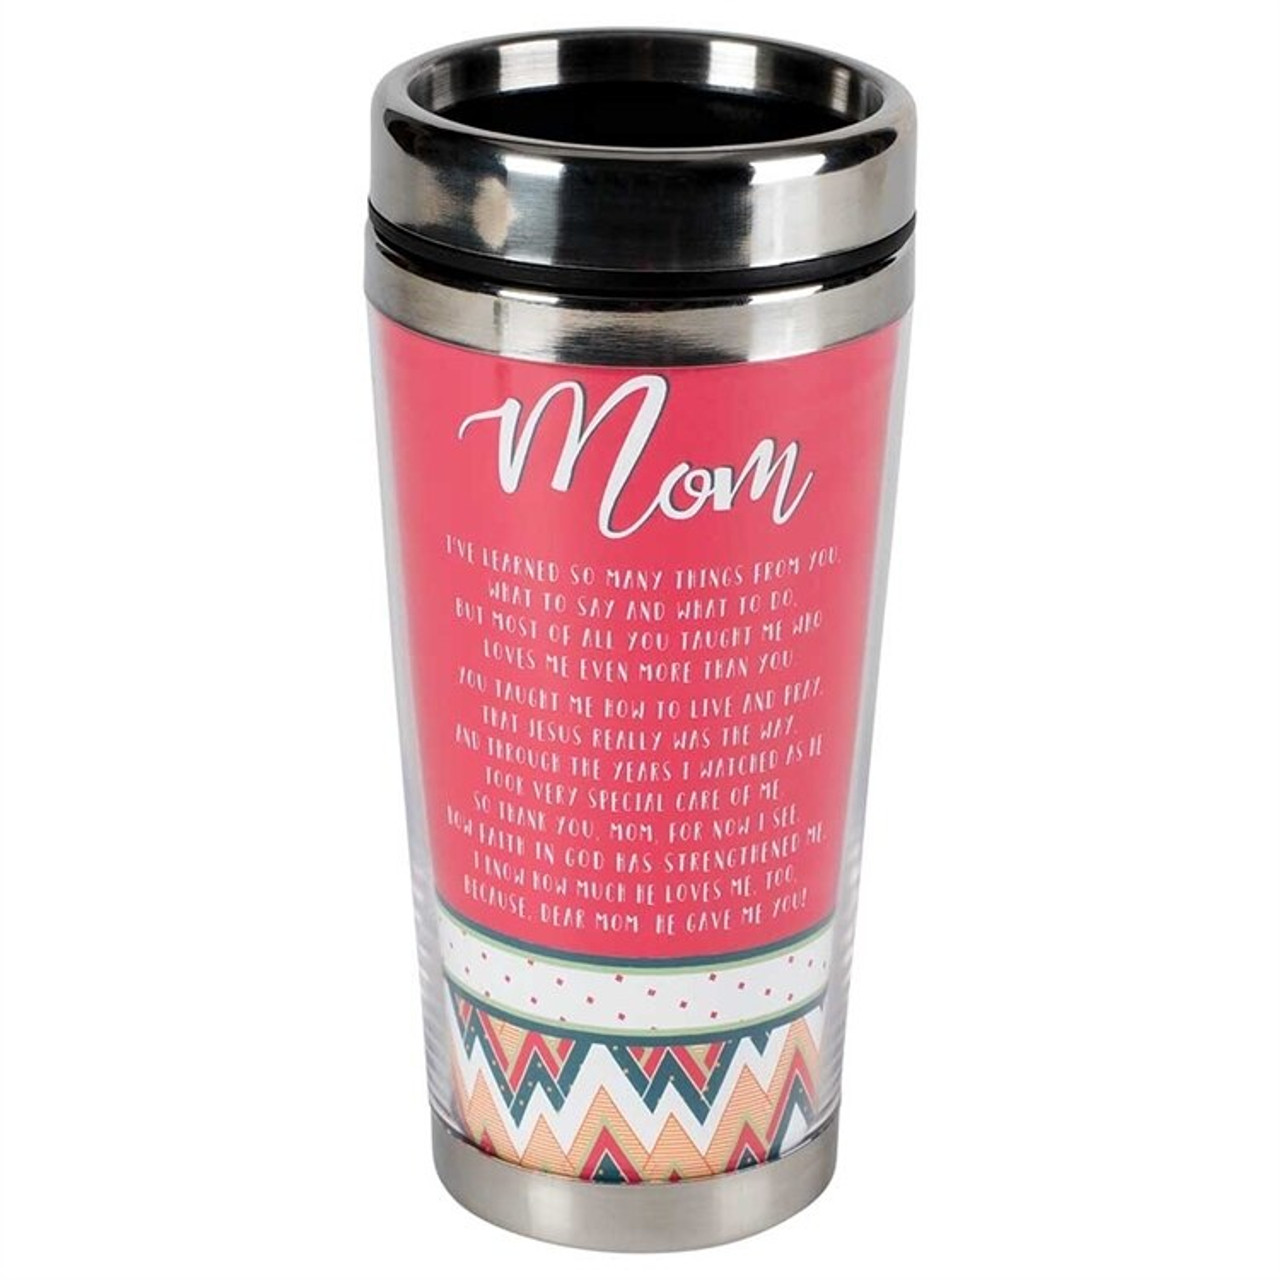 https://cdn11.bigcommerce.com/s-r75dscg/images/stencil/1280x1280/products/20818/44690/Mom-Travel-Mug-with-Prayer-made-from-Stainless-Steel-holds-16-ounces-ssmug233__48167.1561391642.jpg?c=2